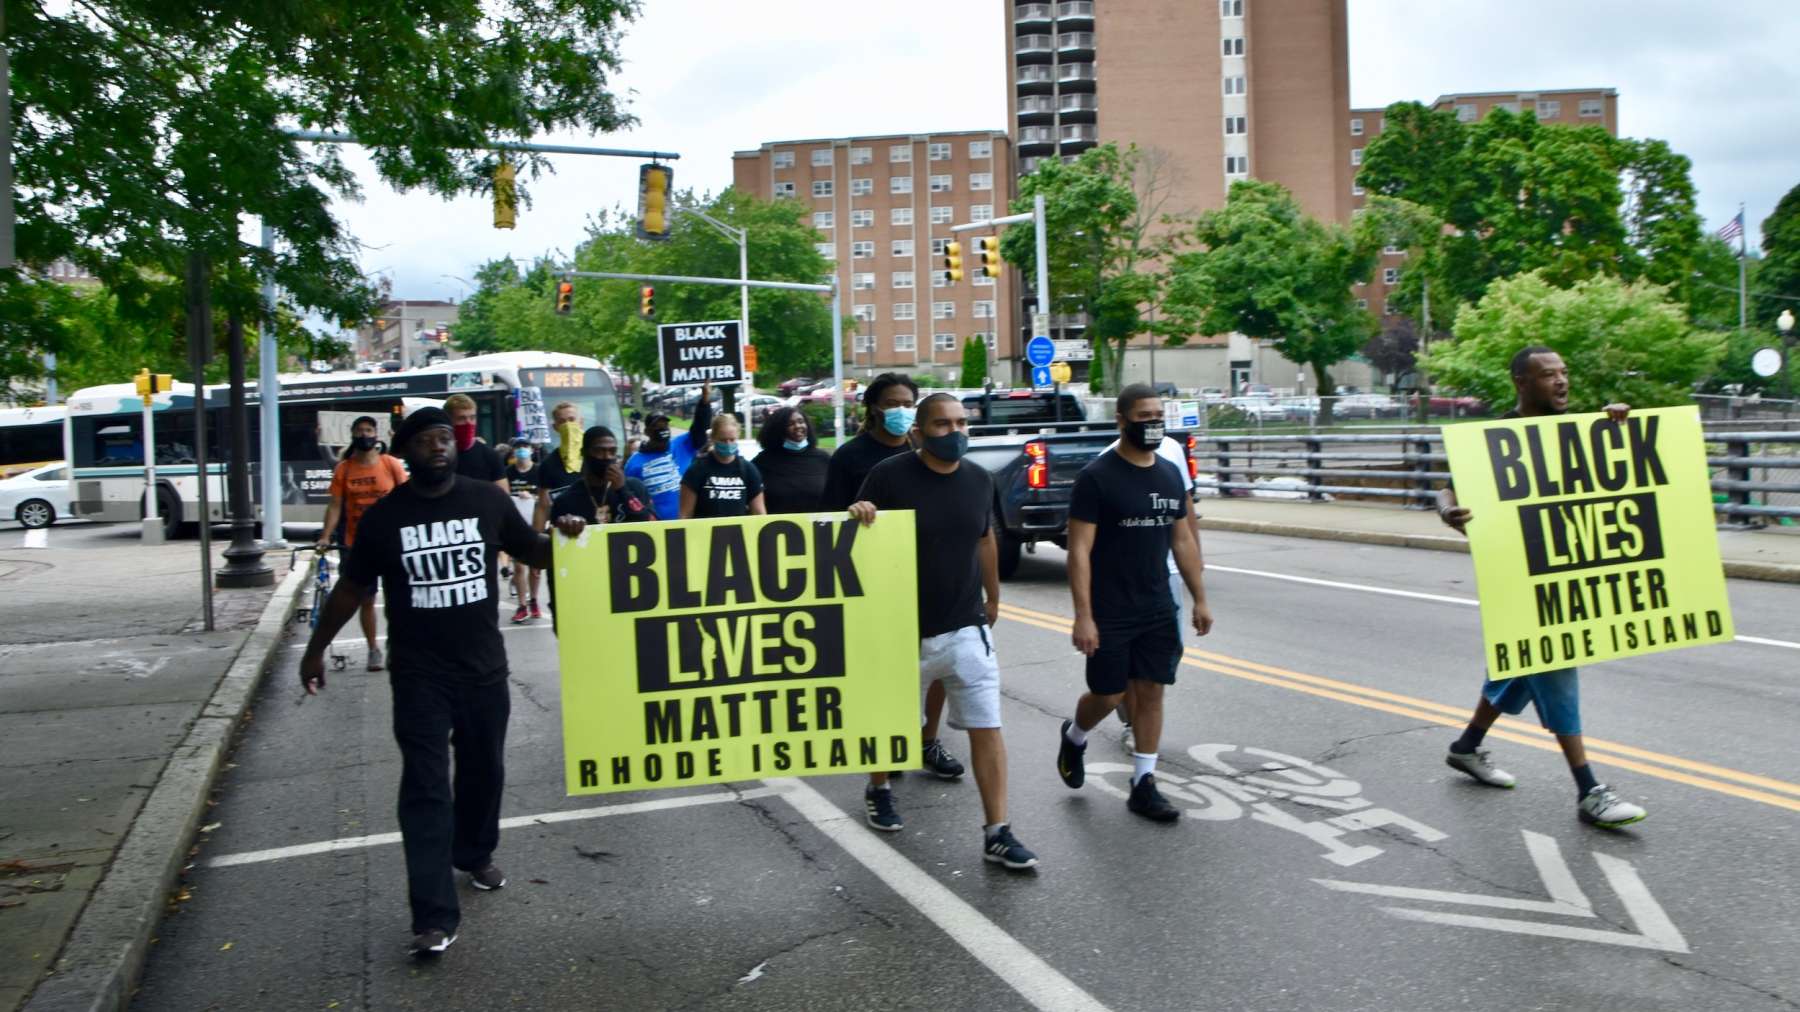 Rhode Island News: Black Lives Matter RI marches against racism – from Pawtucket City Hall to McCoy Stadium